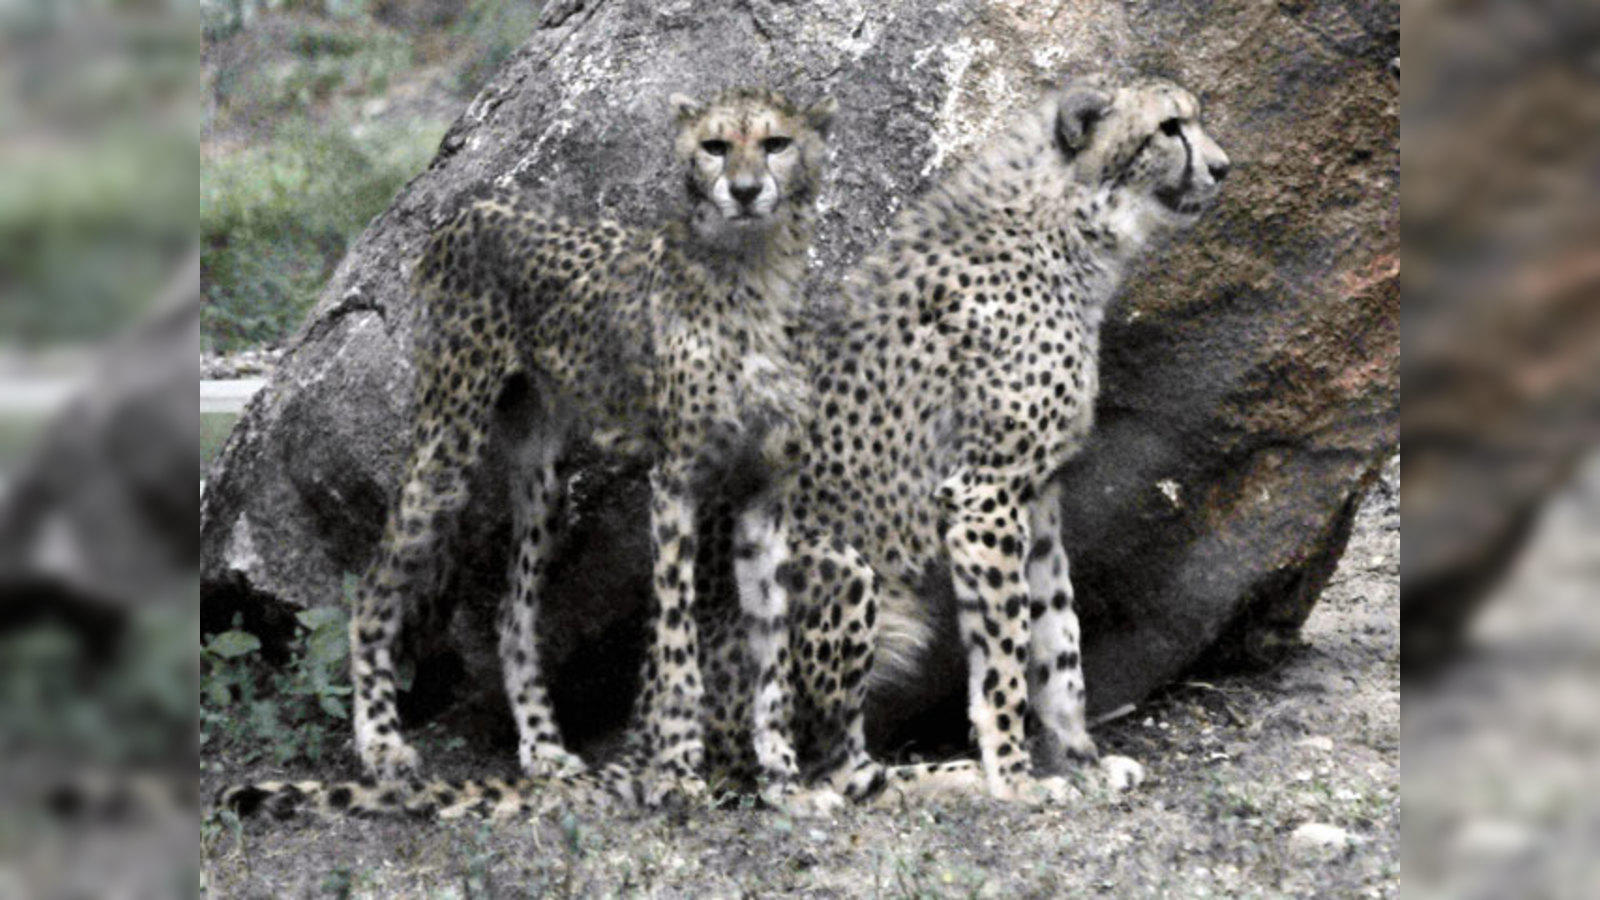 Cheetah, tiger embryos cloned from frozen skin cells - The Economic Times